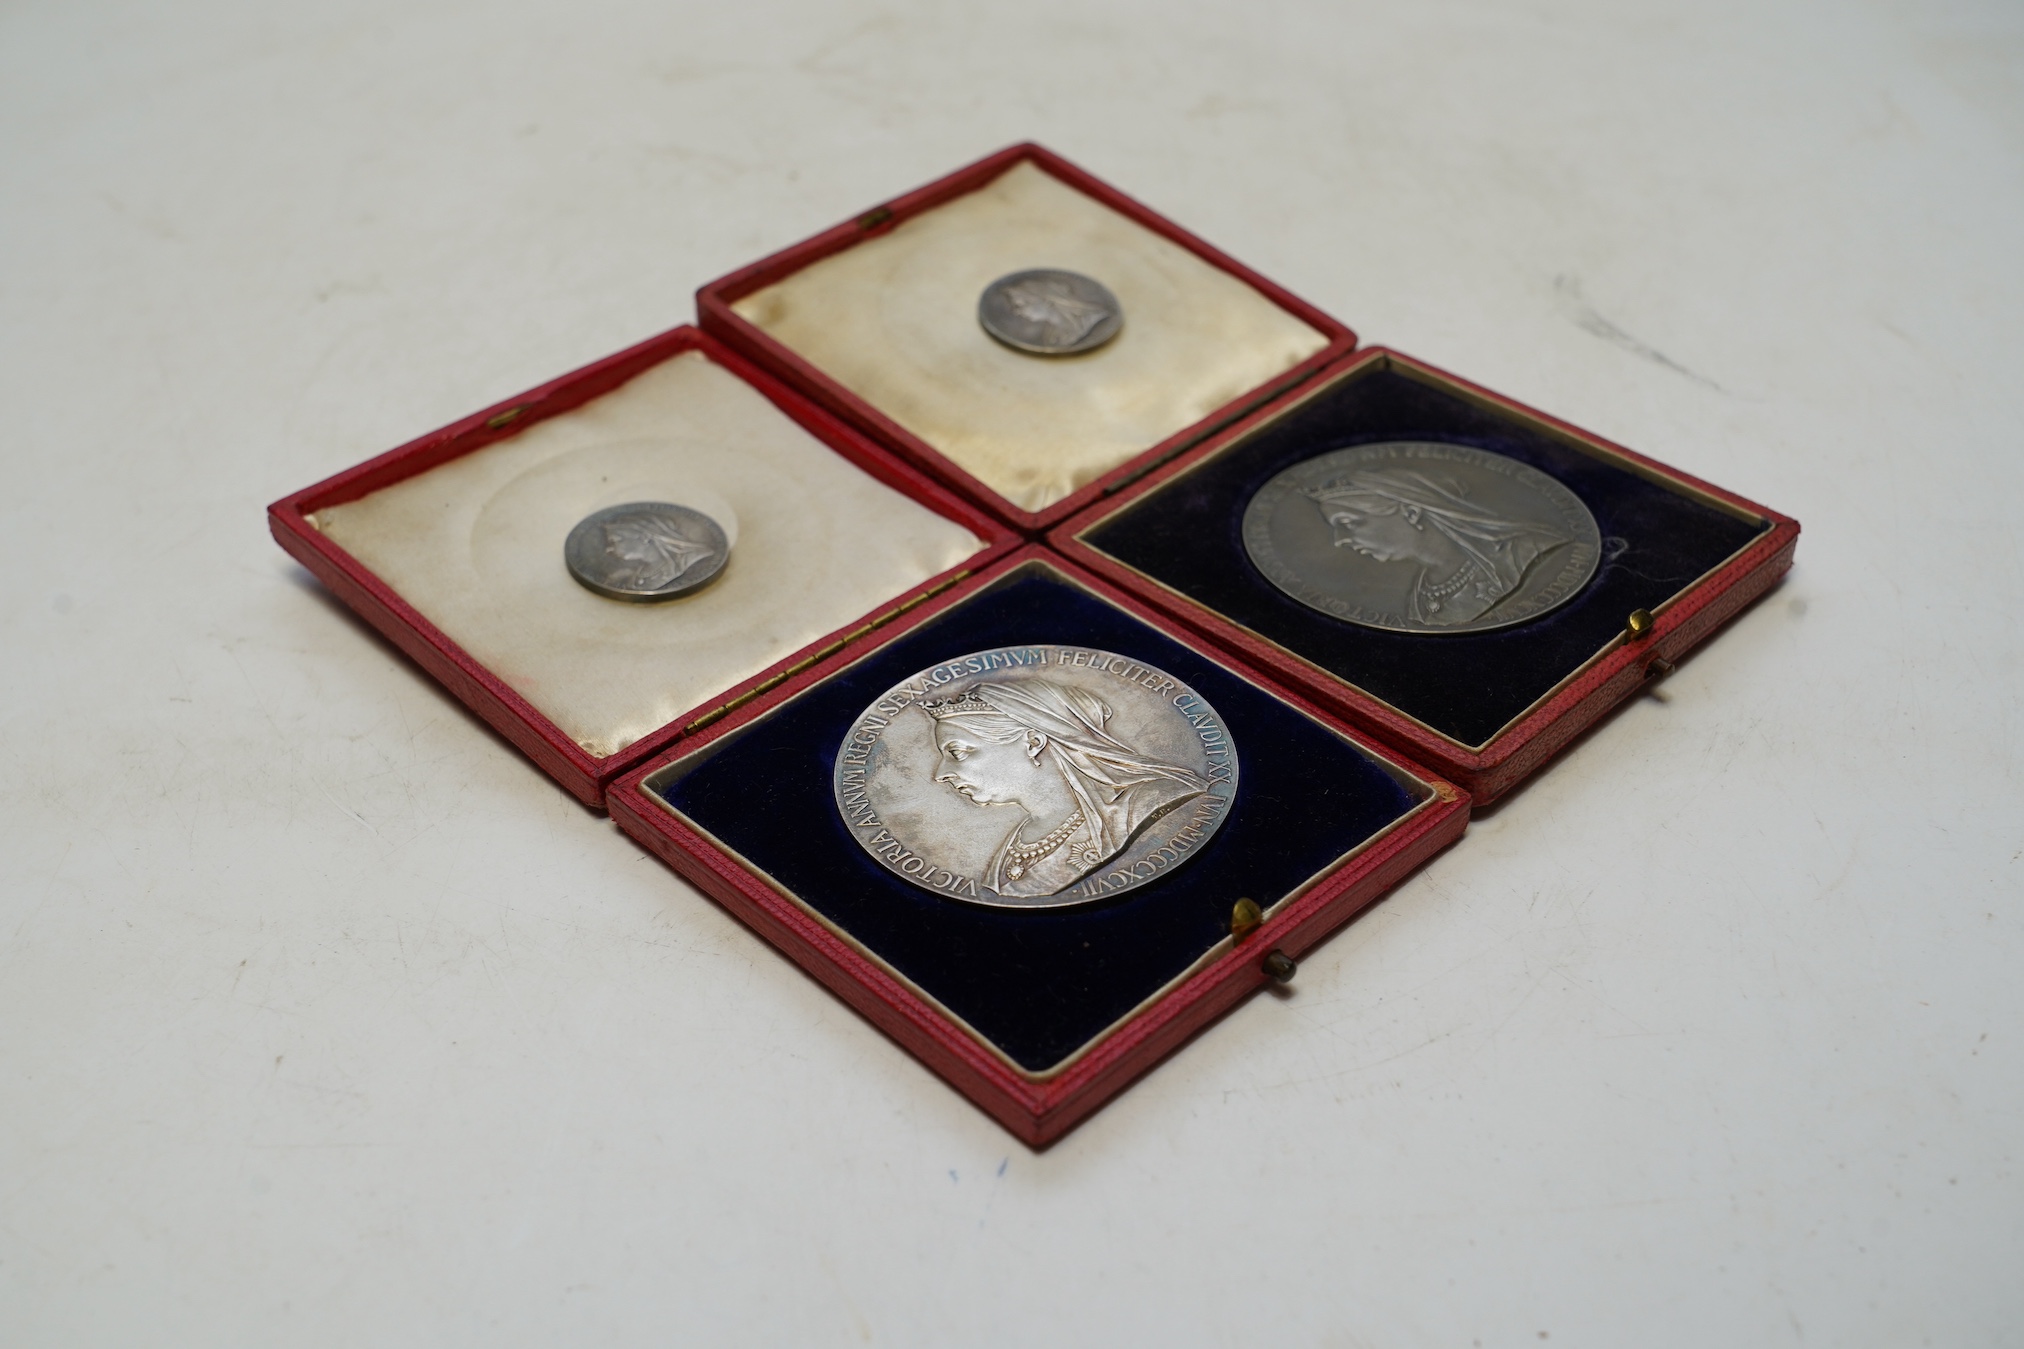 Two Victoria 1897 Diamond Jubilee commemorative silver medals, cased, and two smaller silver medals. Condition - fair